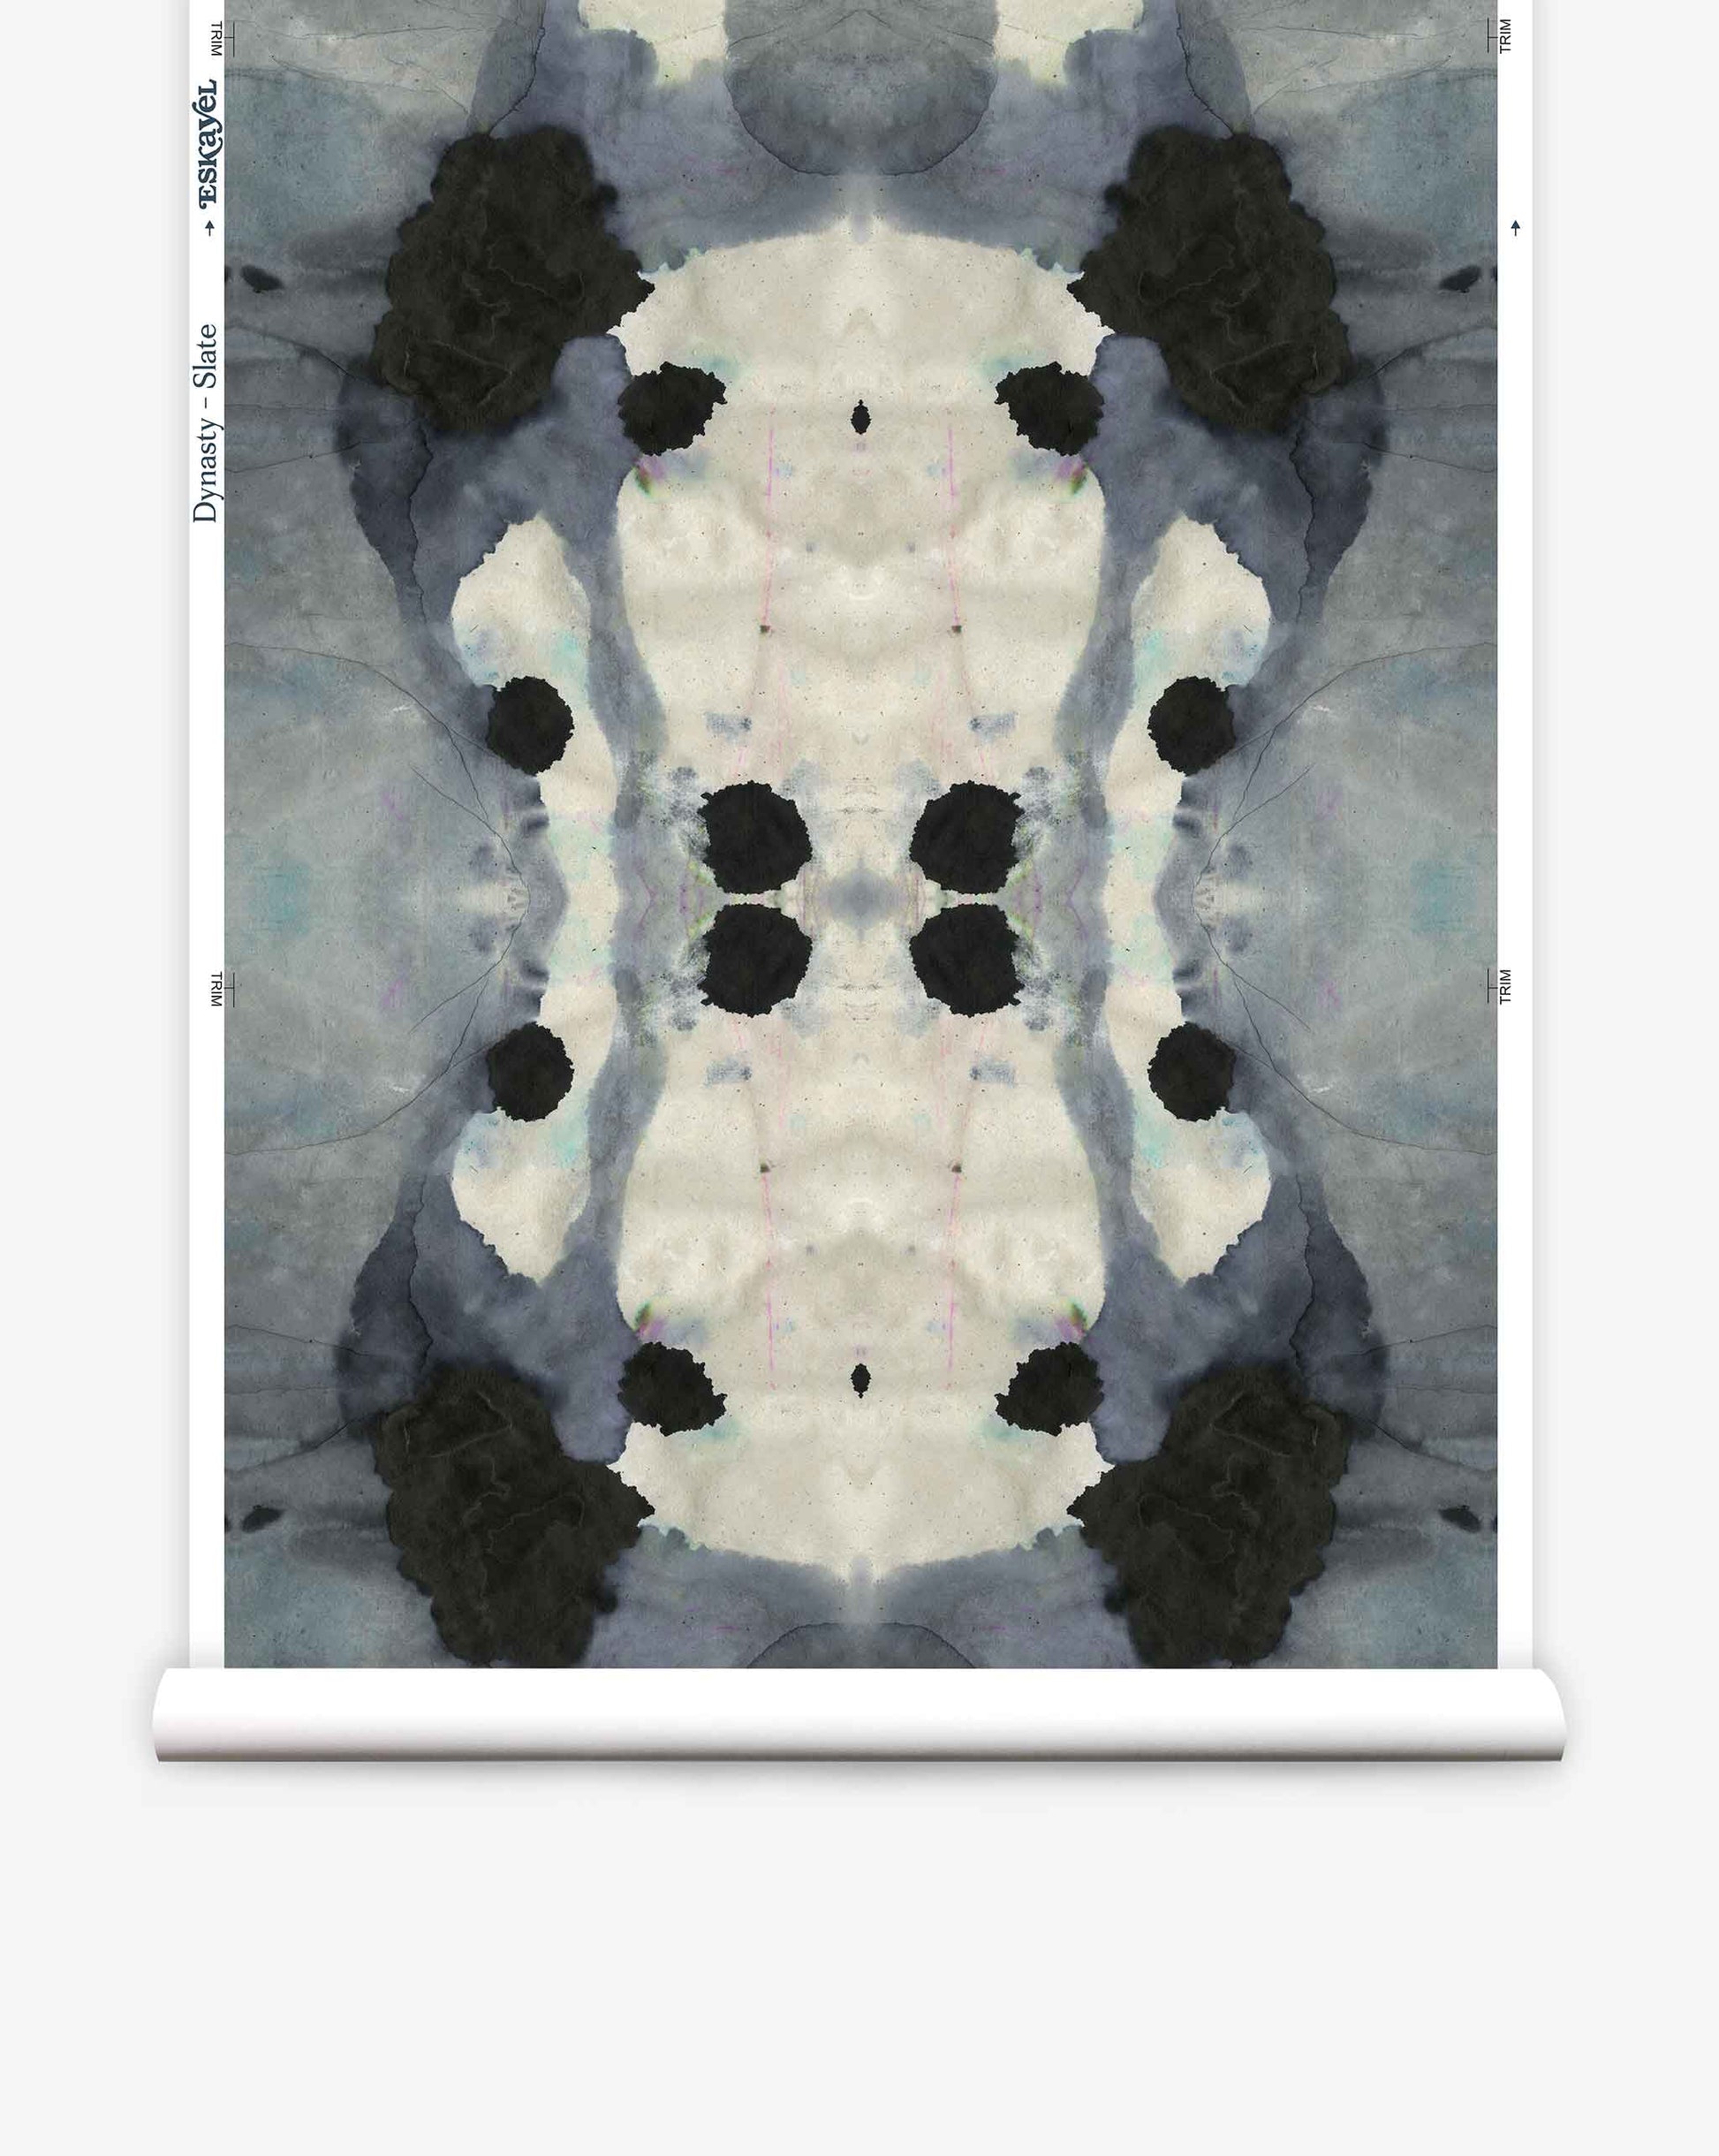 A blue and black ink blot design on a roll of high-end wallpaper is a Dynasty Slate.